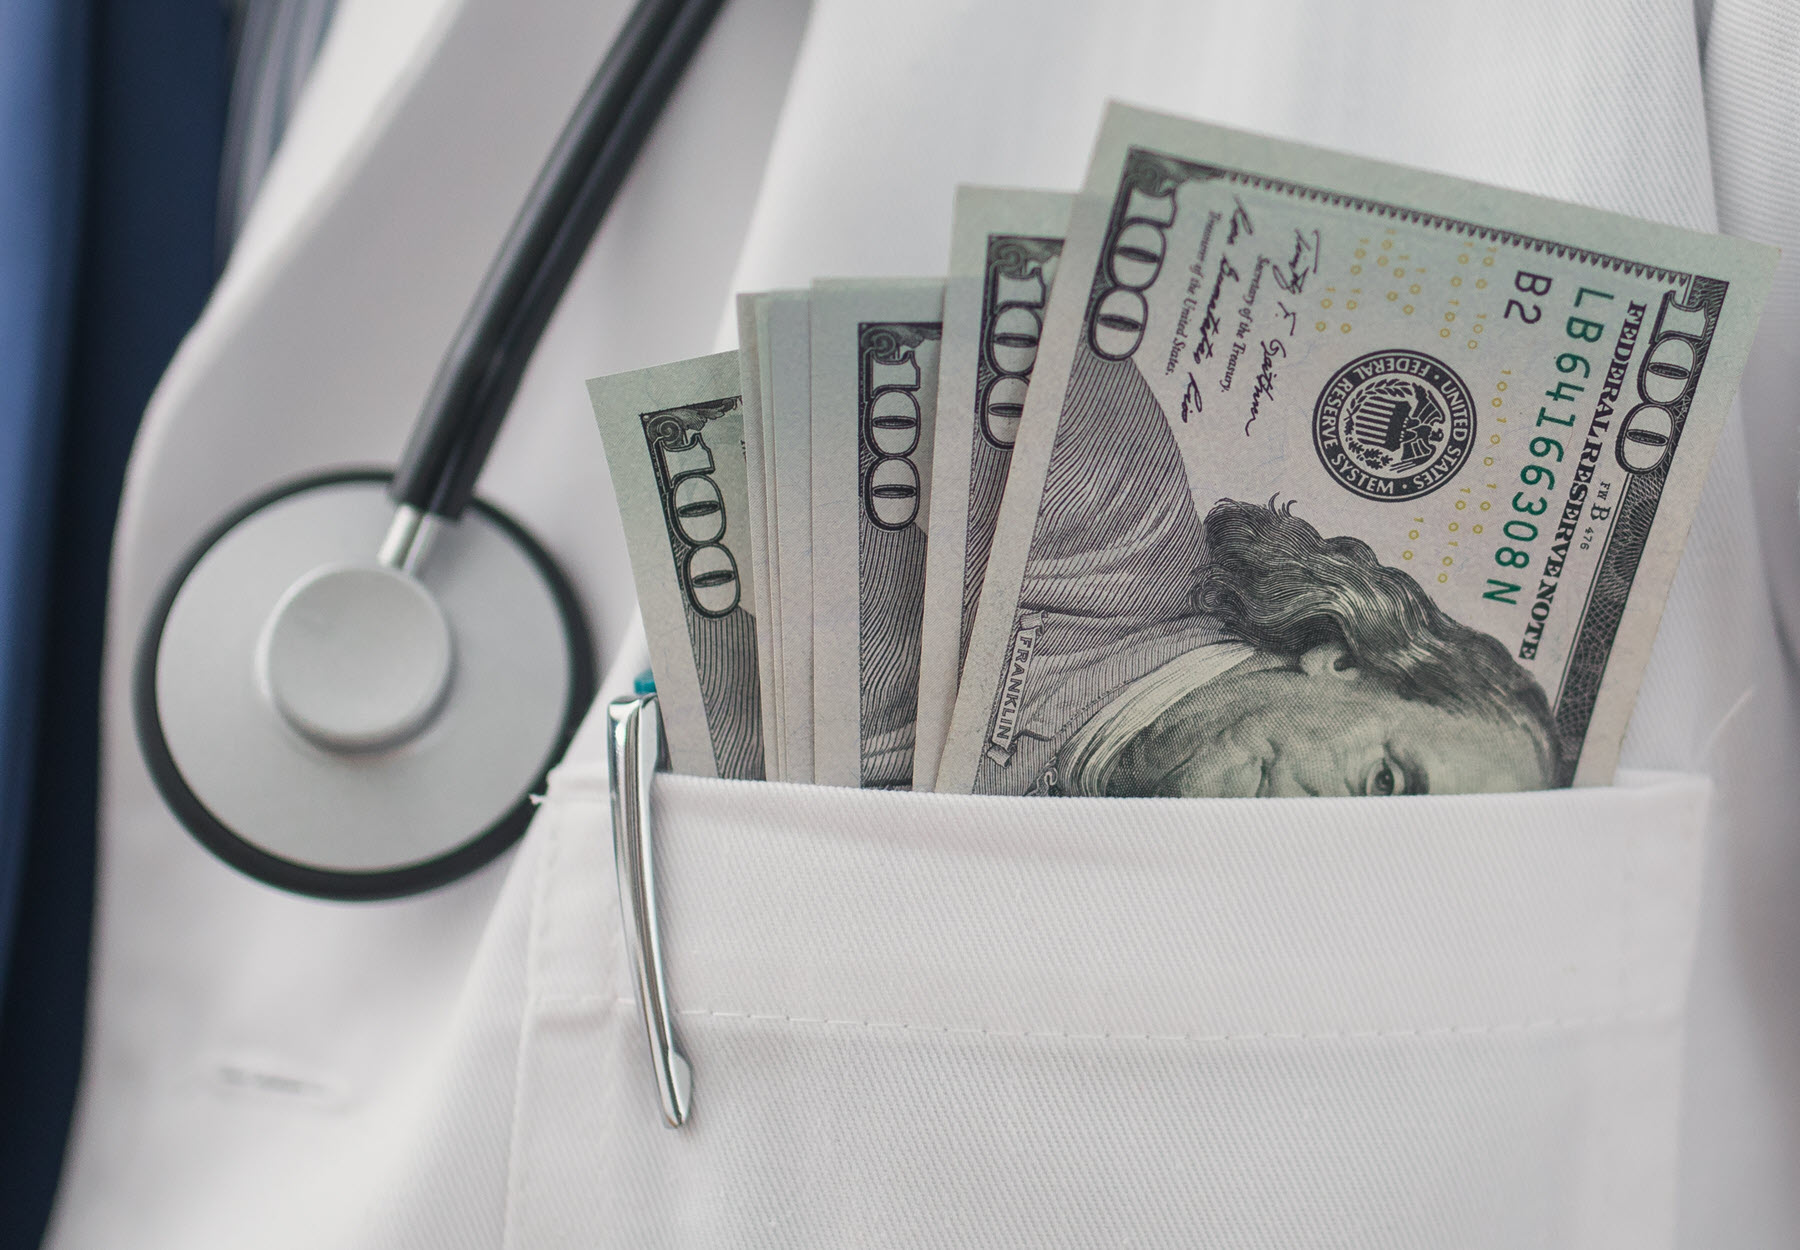 Closeup of doctor's coat pocket with US cash inside to represent kickbacks concept. Stock image.